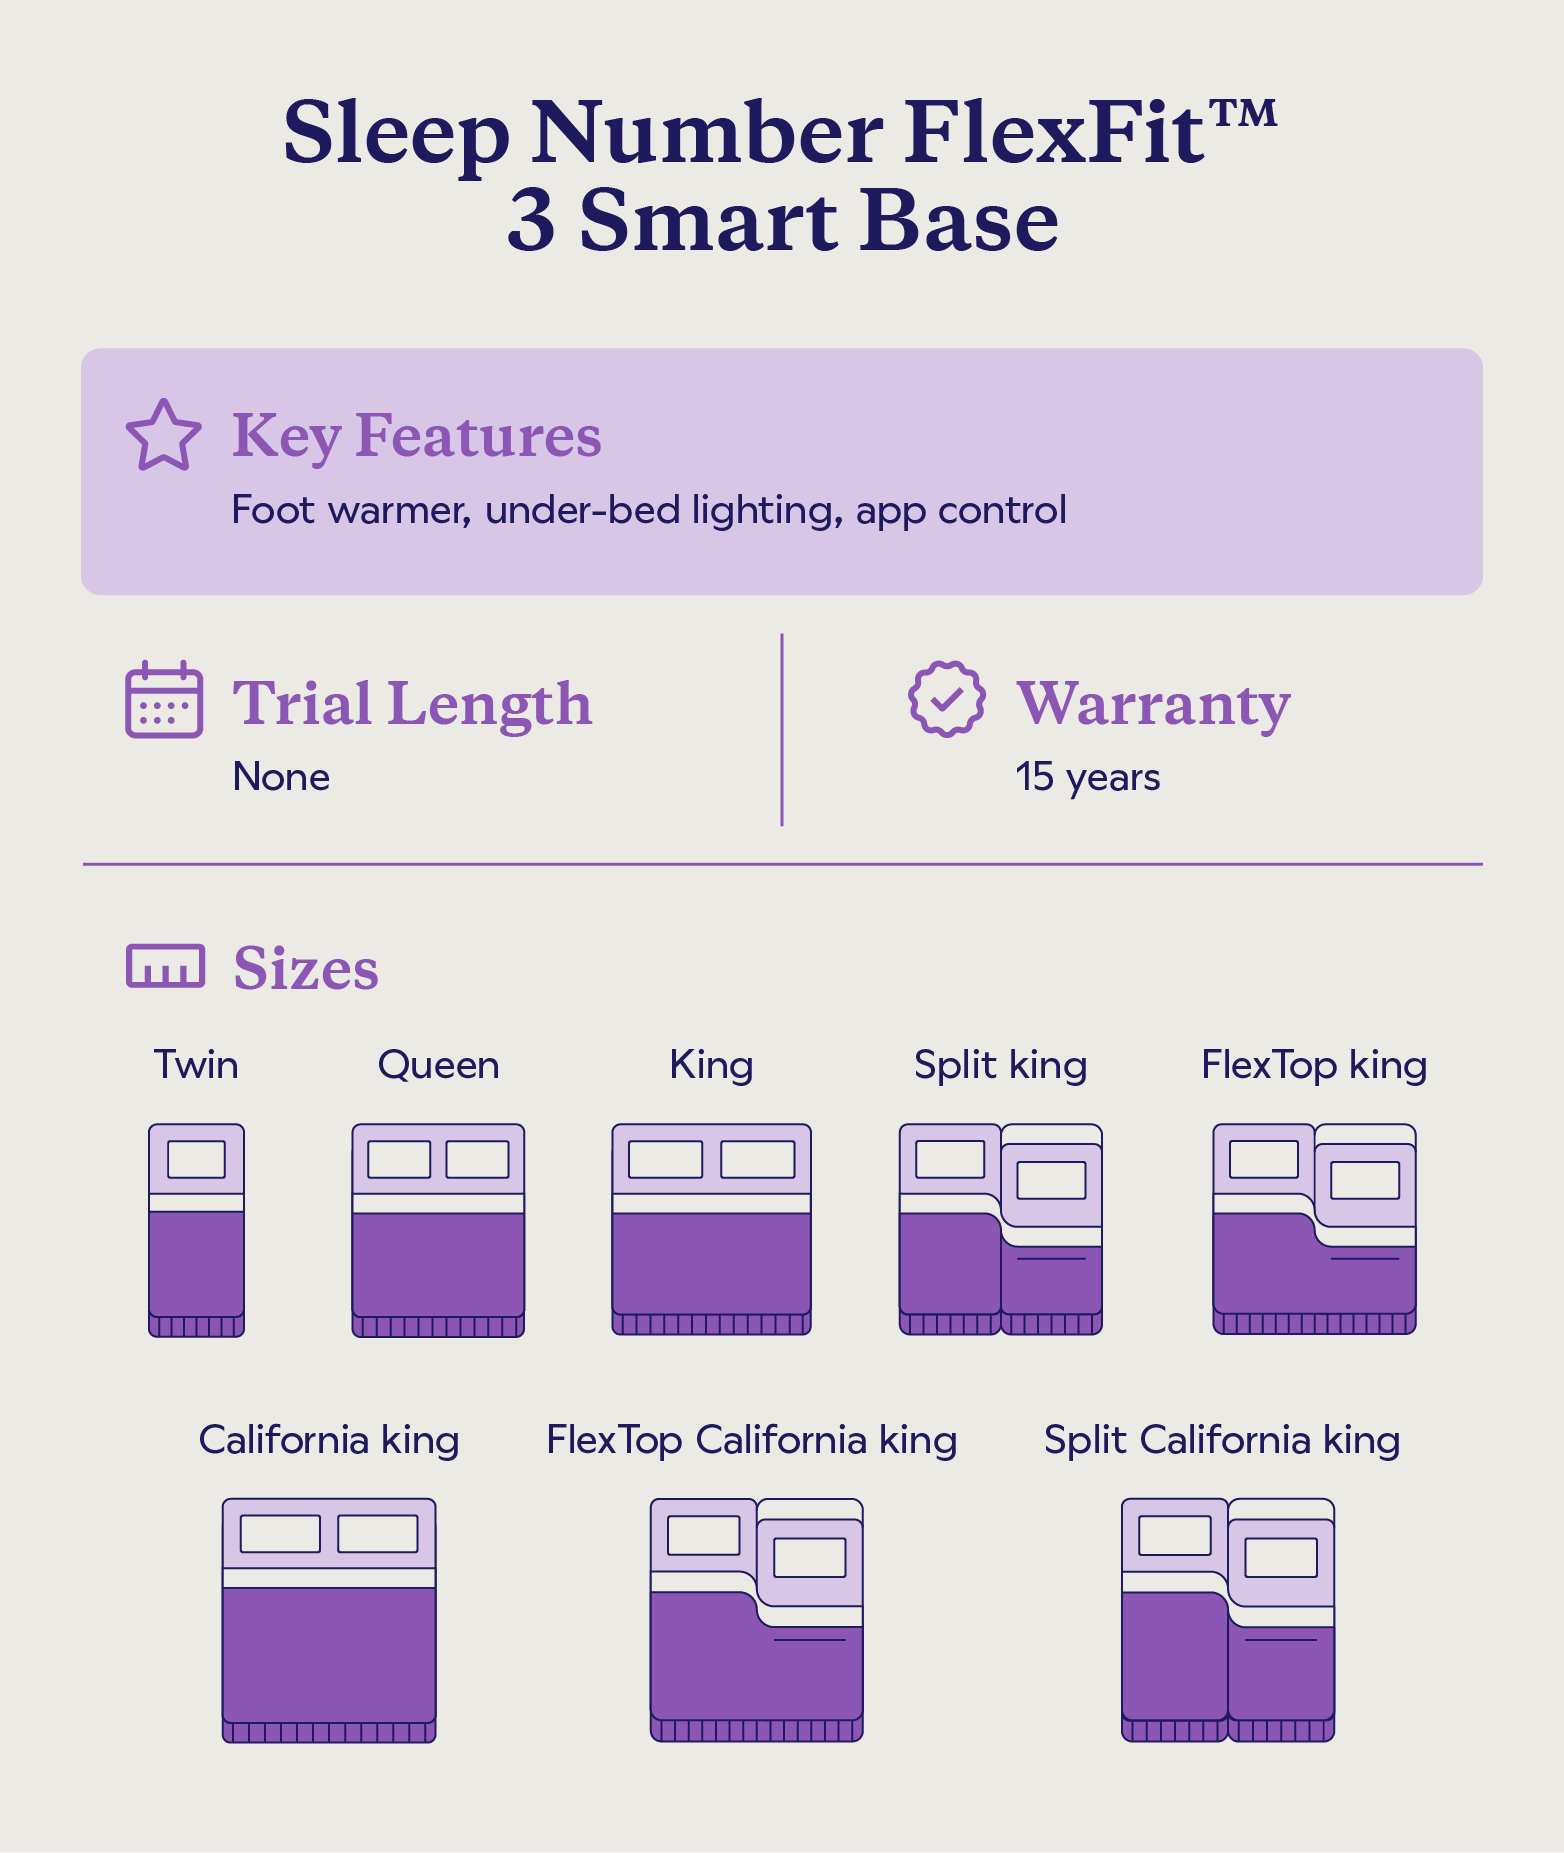  Key features and sizes of the Sleep Number FlexFit 3 Smart Base.